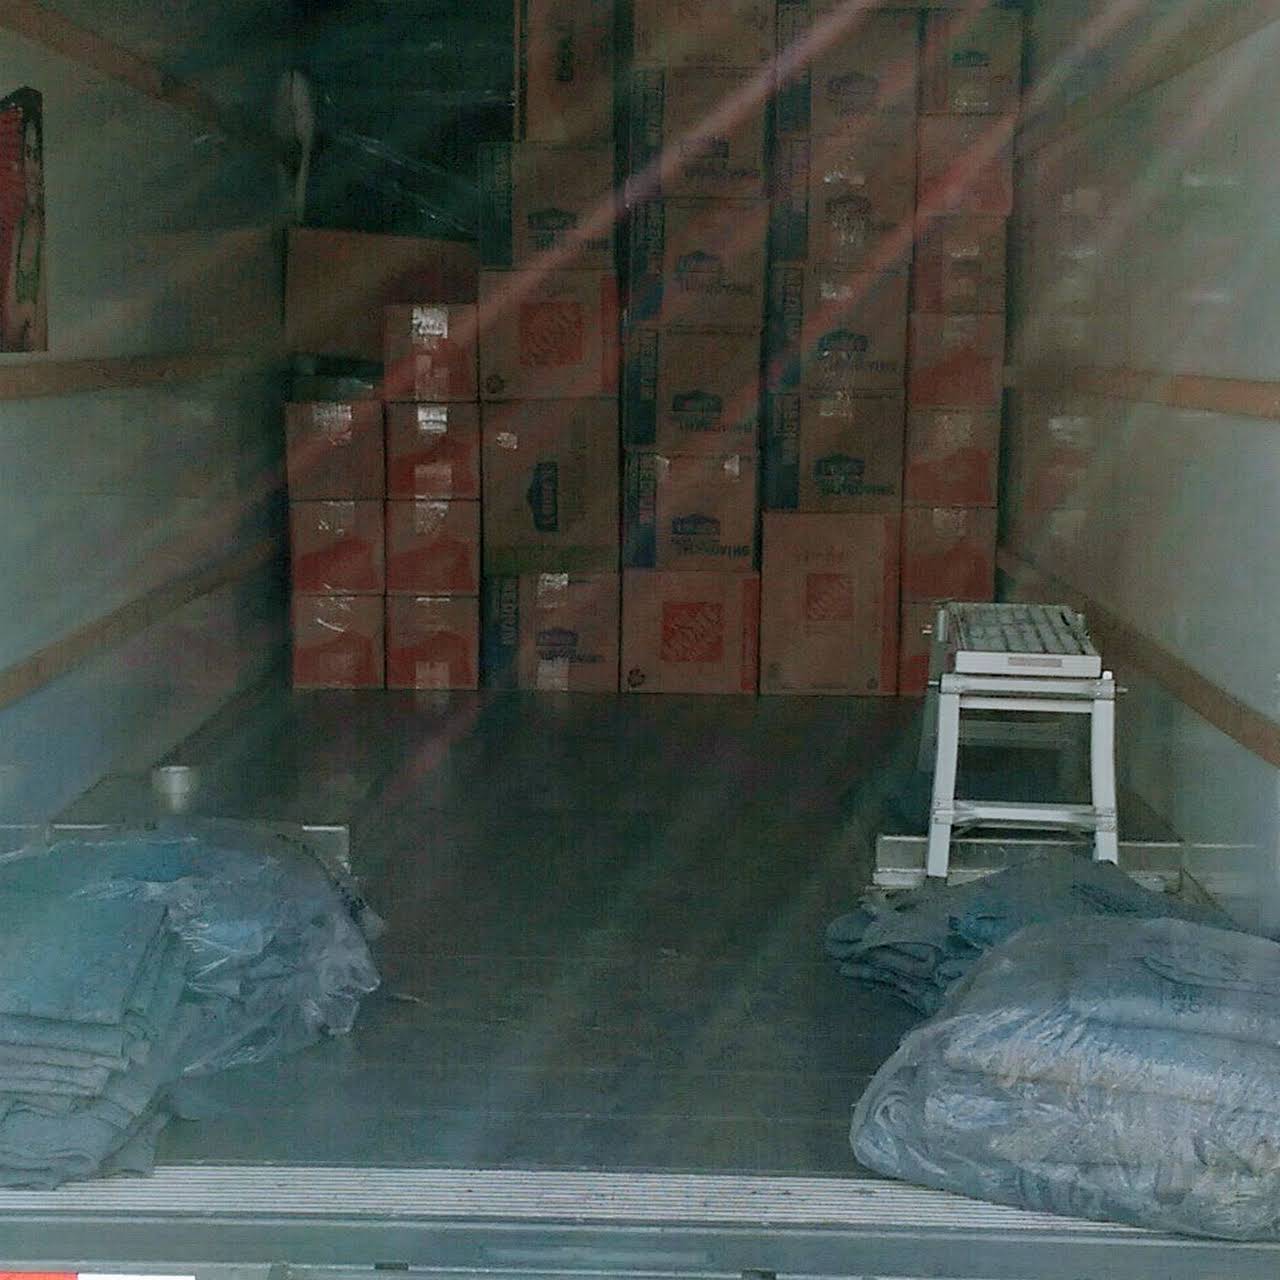 The back of a moving truck filled with boxes.